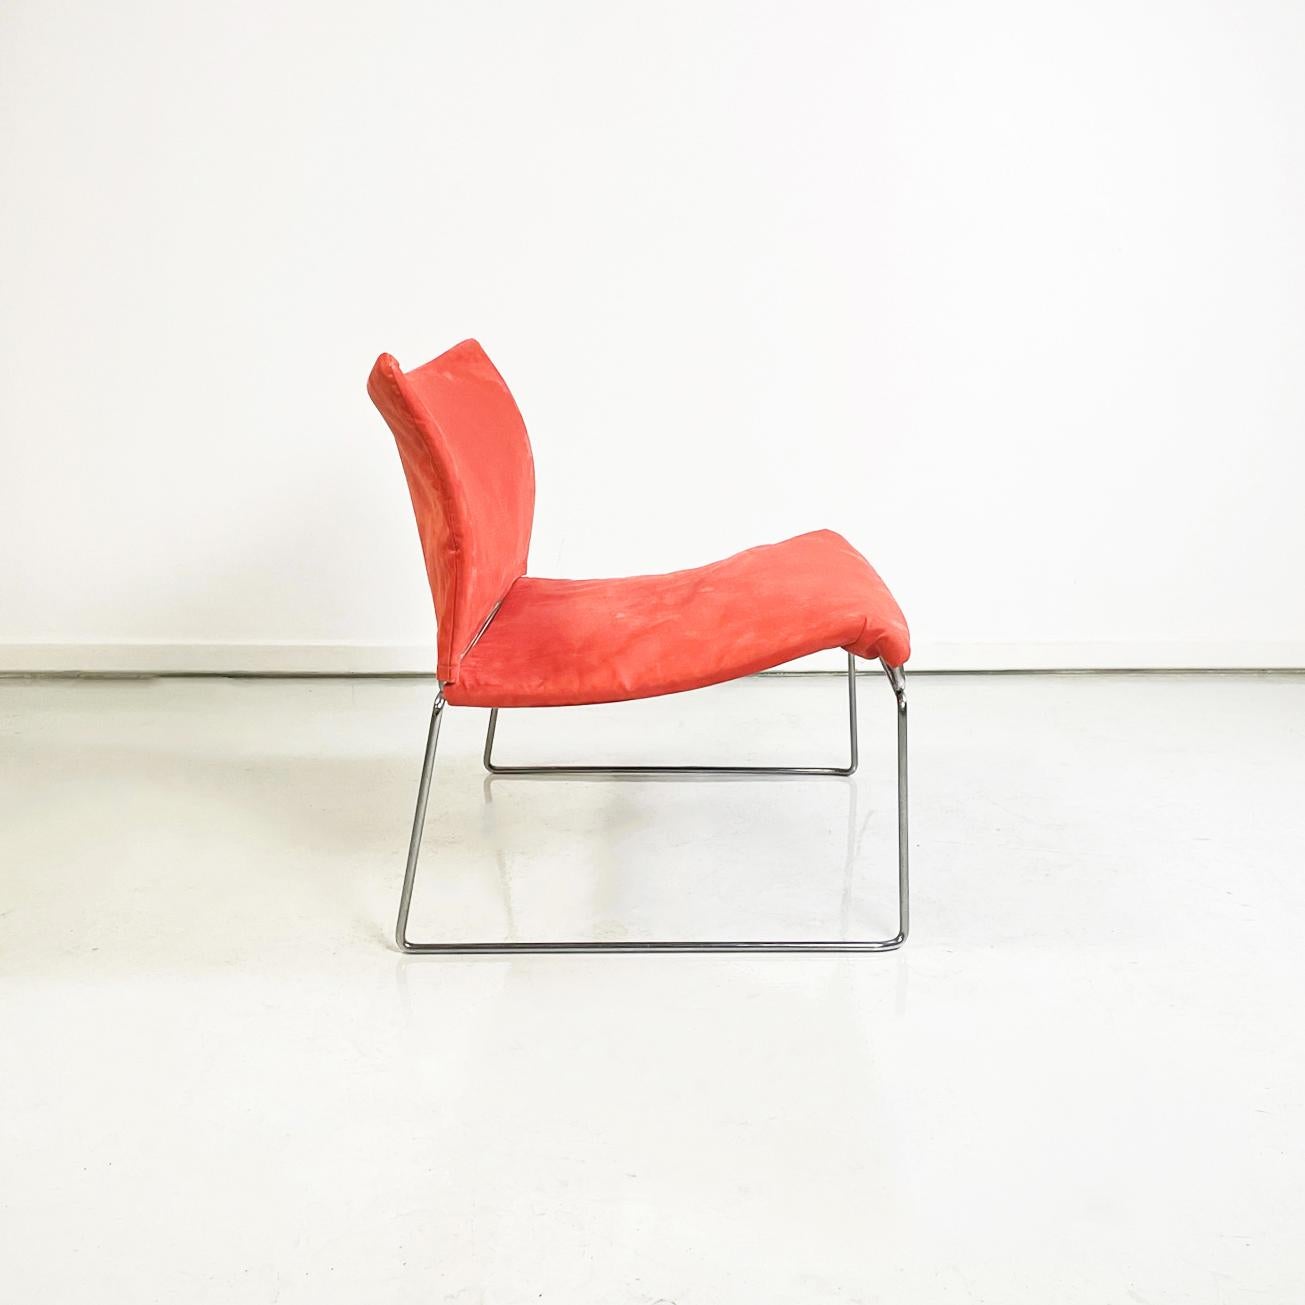 Italian Modern Coral Armchair Mod. Saghi by Kazuhide Takahama for Gavina, 1970s In Good Condition For Sale In MIlano, IT